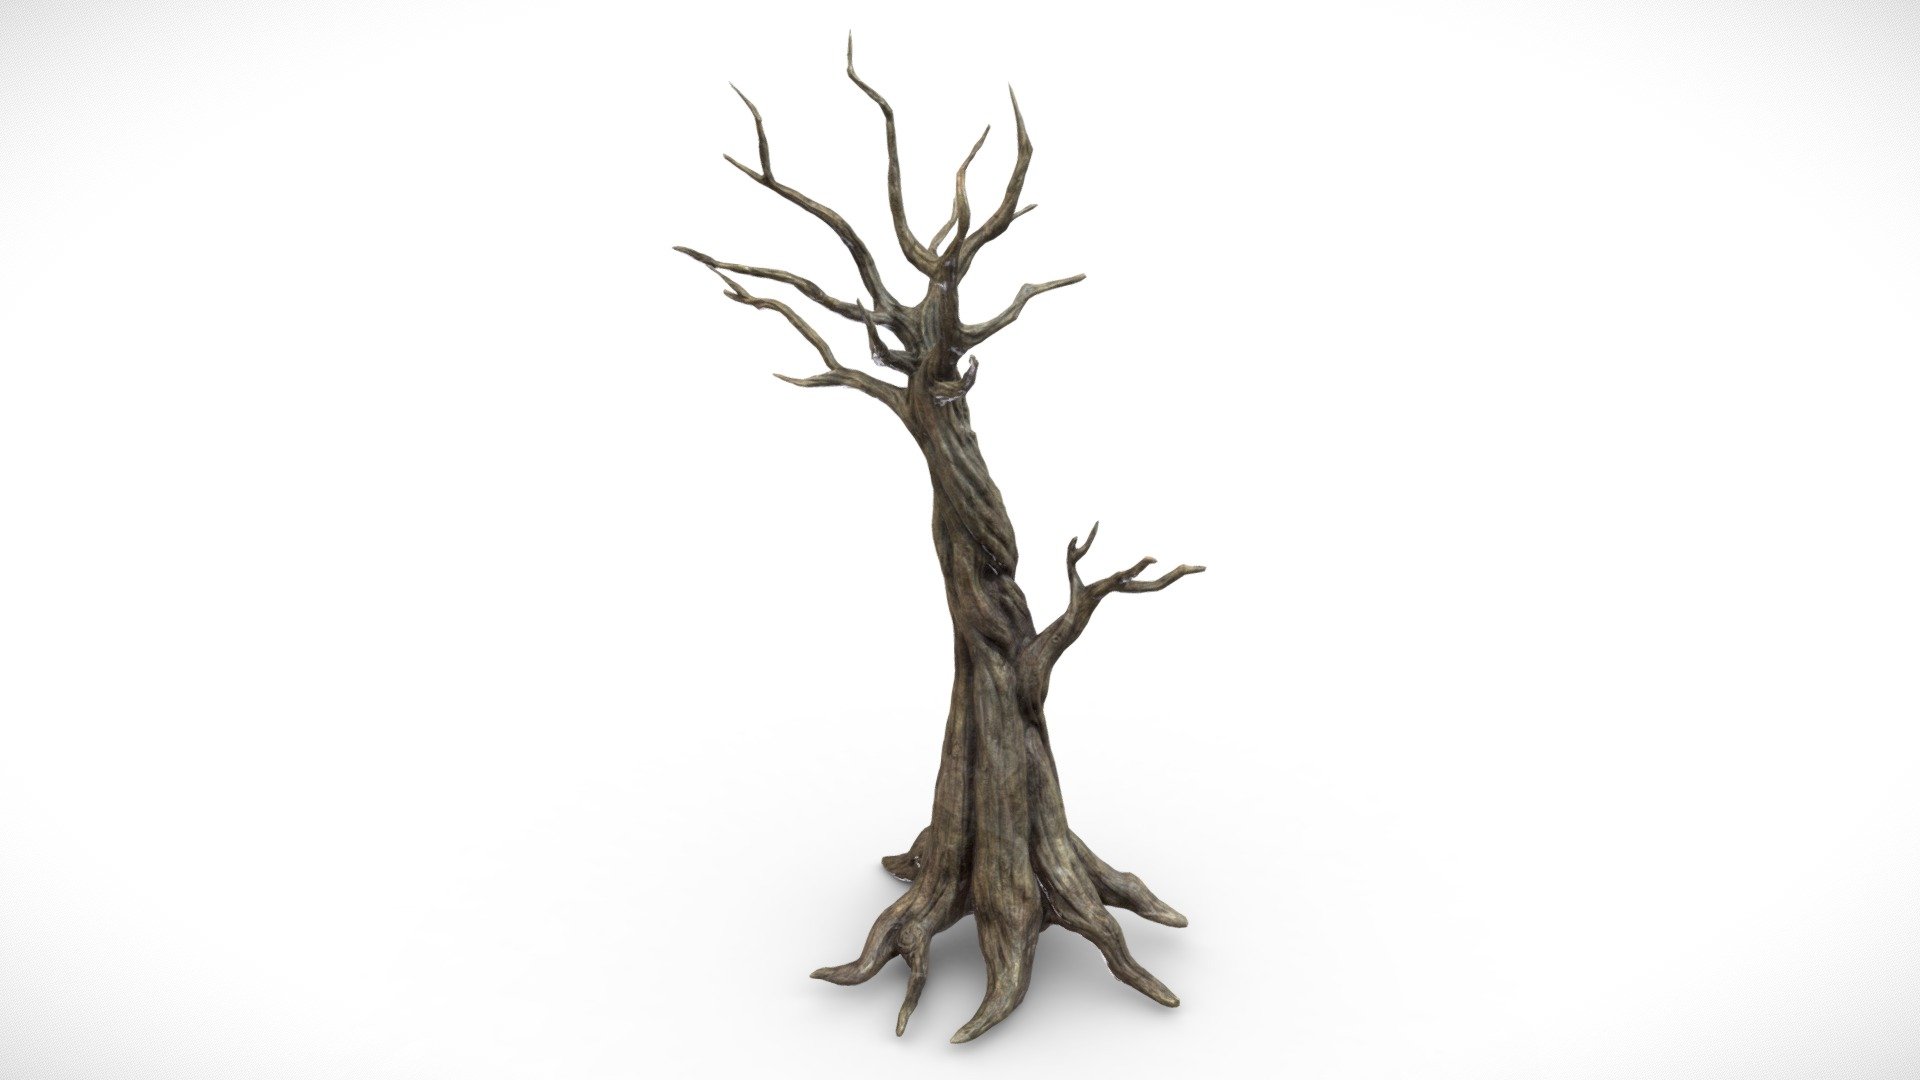 This Tree Mesh is made up of 1 UV Map, with 4096x4096 resolution.
Textures contained are:
- Diffuse
- Metallic
- Normal
- Roughness - Fantasy Dark Forest Tree G - Scary - 4k - Buy Royalty Free 3D model by Davis3D 3d model